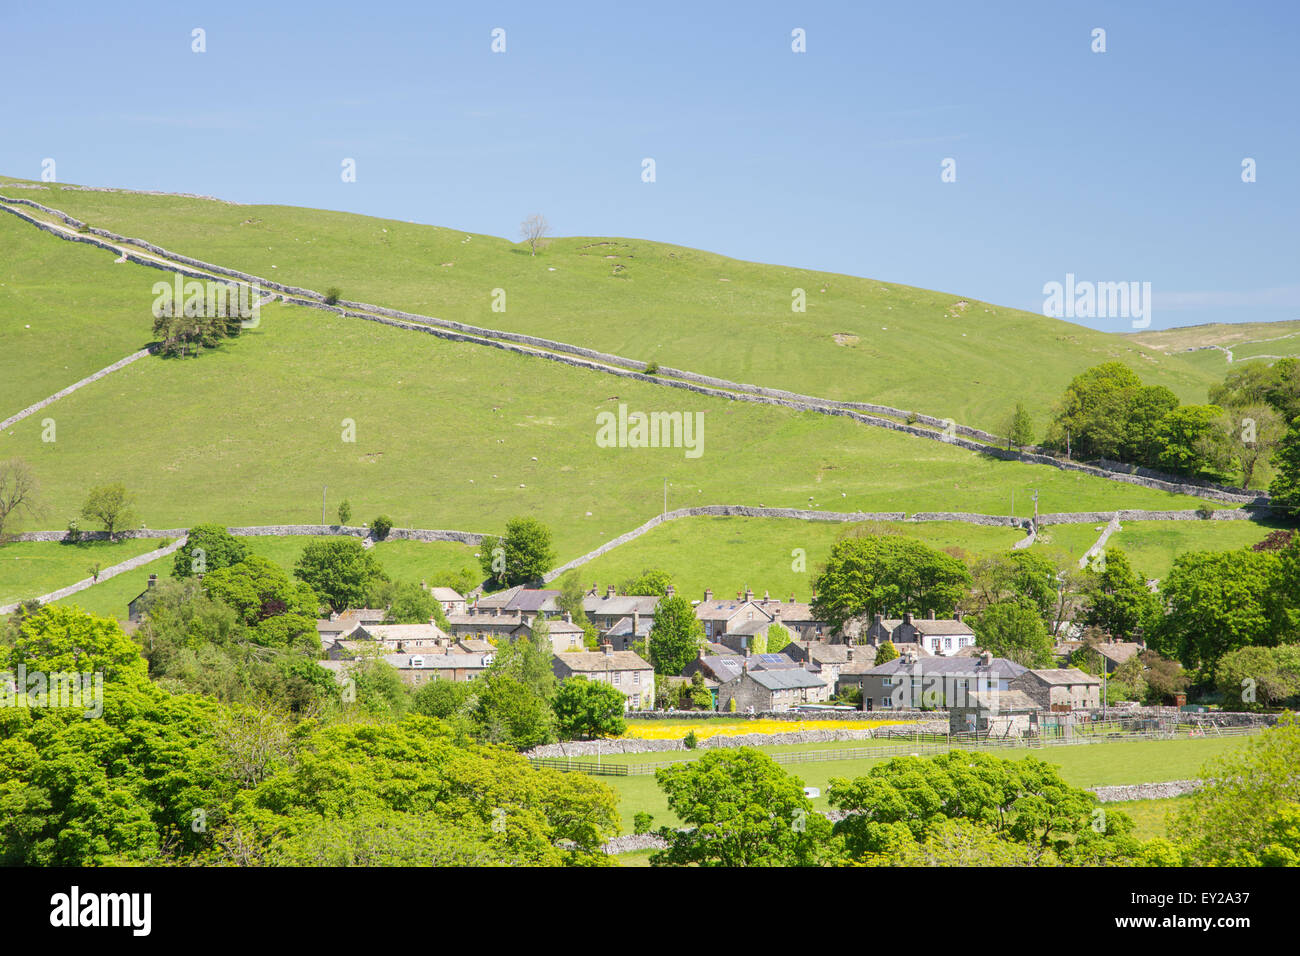 Das Dorf Kettlewell in Wharfdale, Yorkshire Dales National Park, North Yorkshire, England, UK Stockfoto